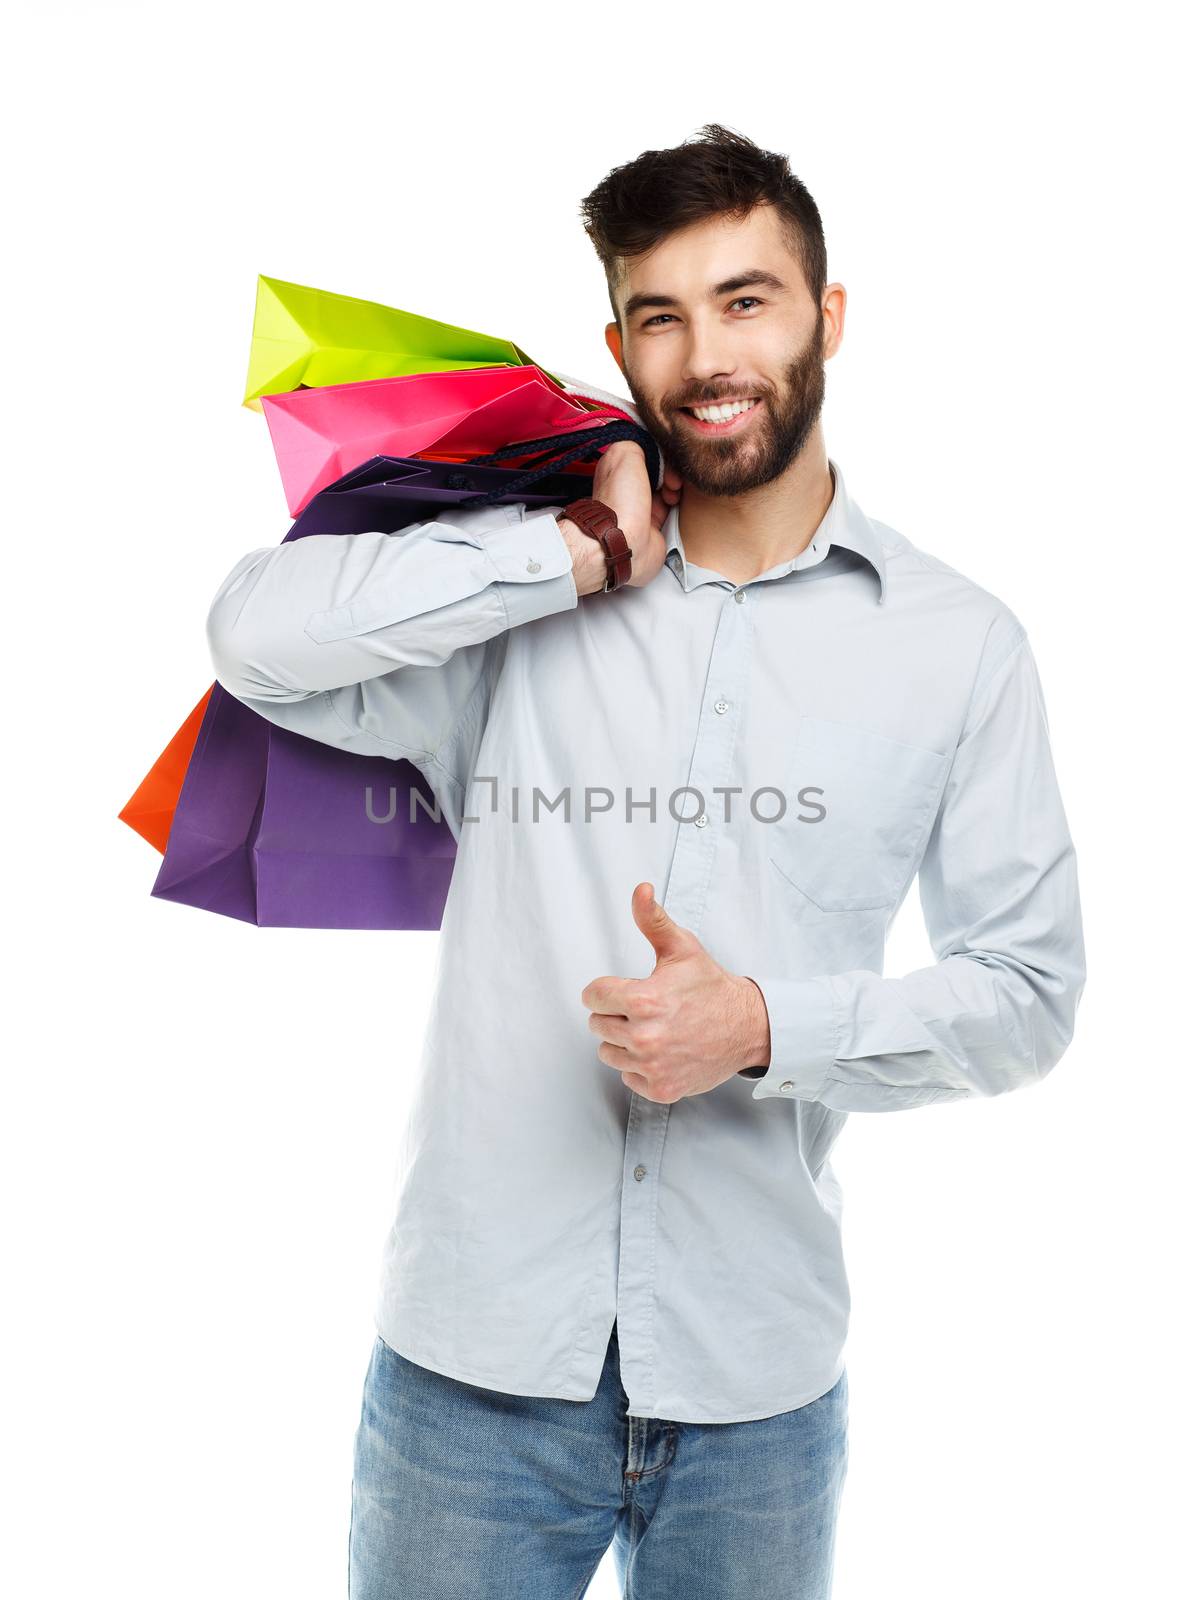 Handsome man holding shopping bags by vlad_star